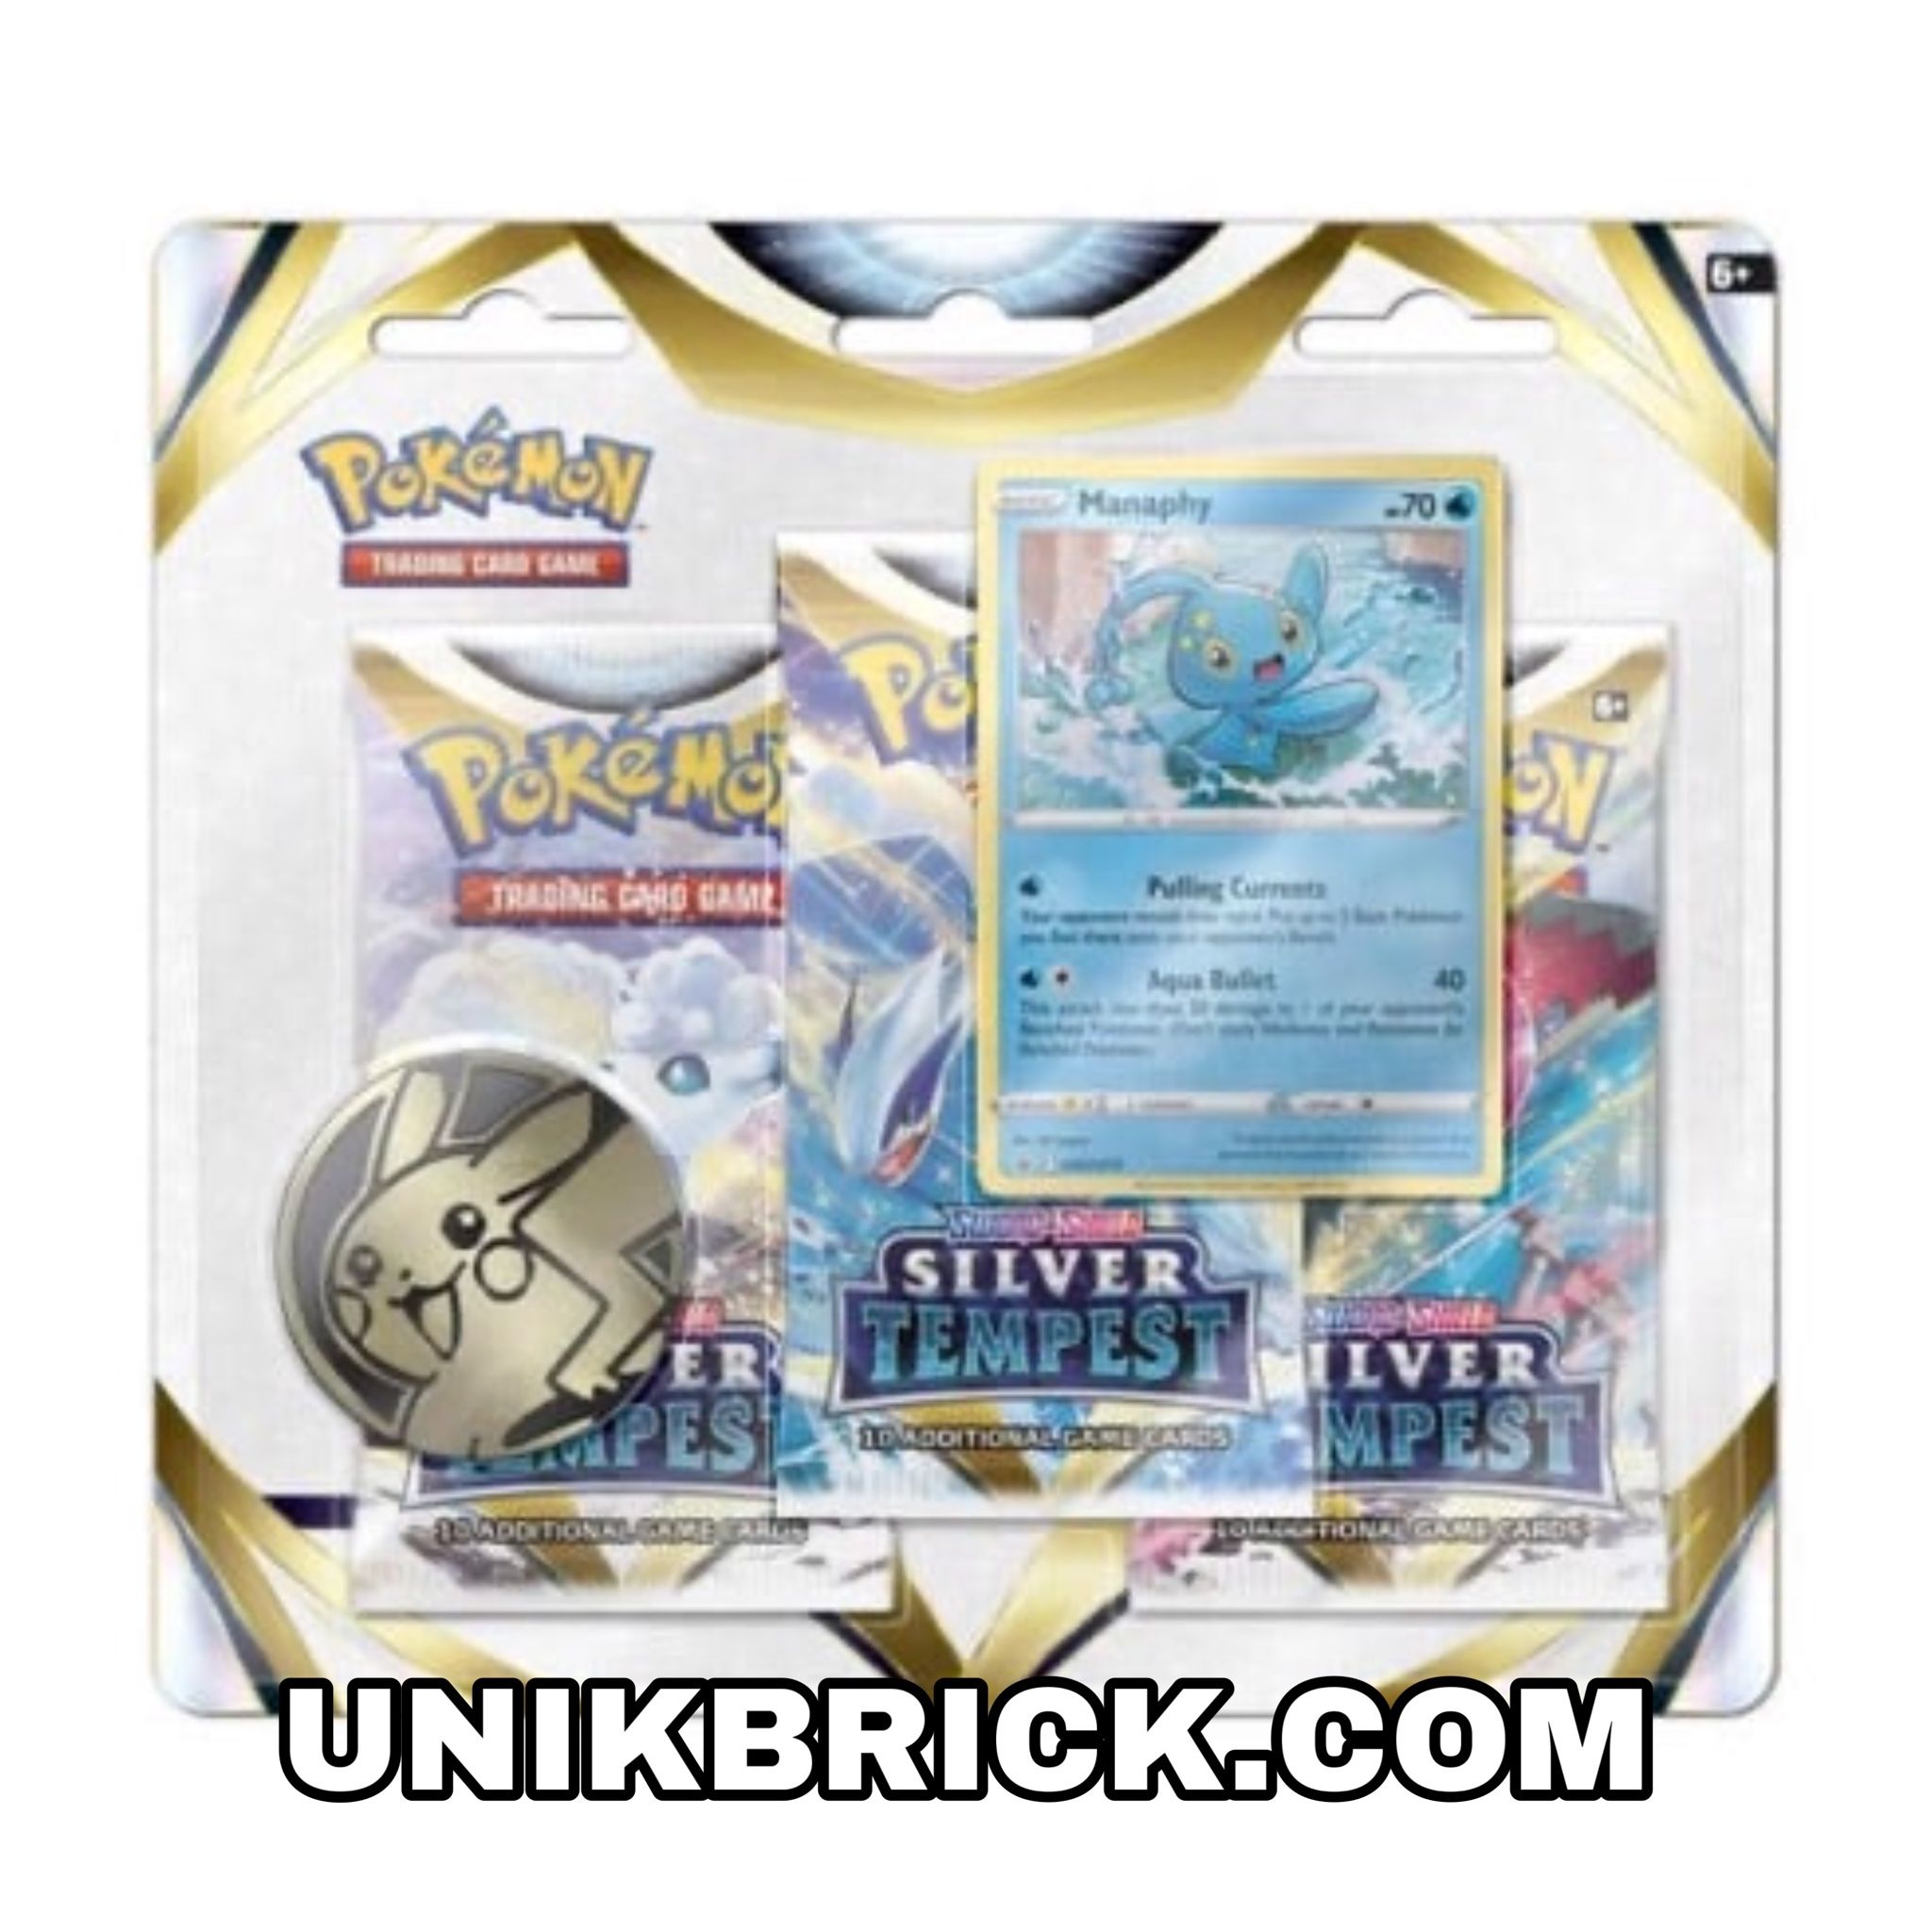 [HÀNG ĐẶT/ ORDER] Pokemon Pokémon TCG Sword & Shield Silver Tempest 3 Pack Blister with Manaphy